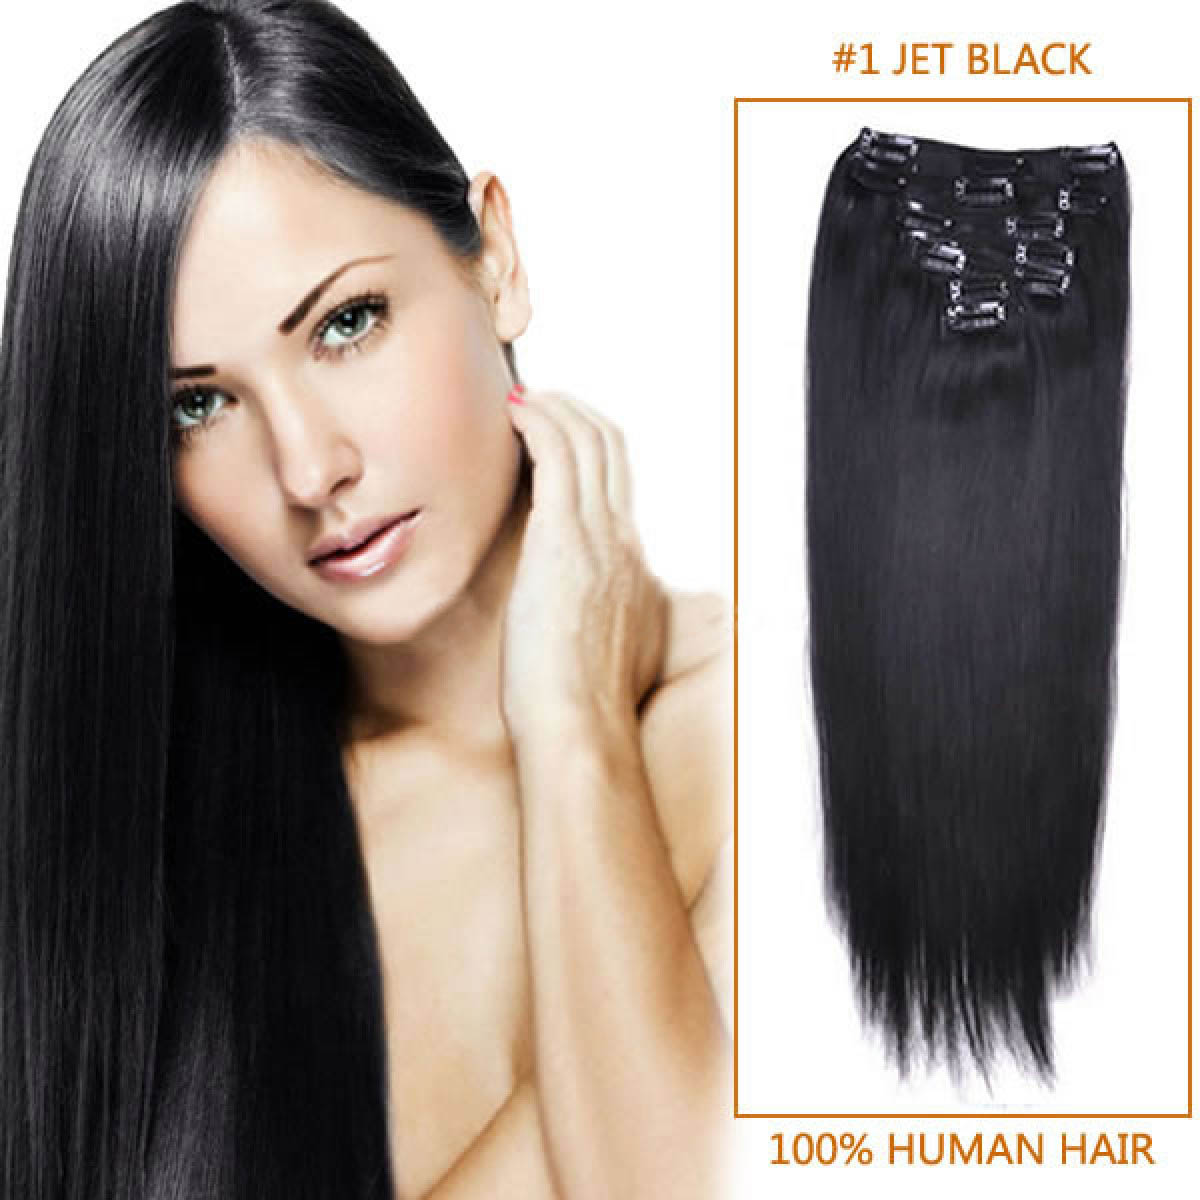 Inch 1 Jet Black Clip In Human Hair Extensions 11pcs